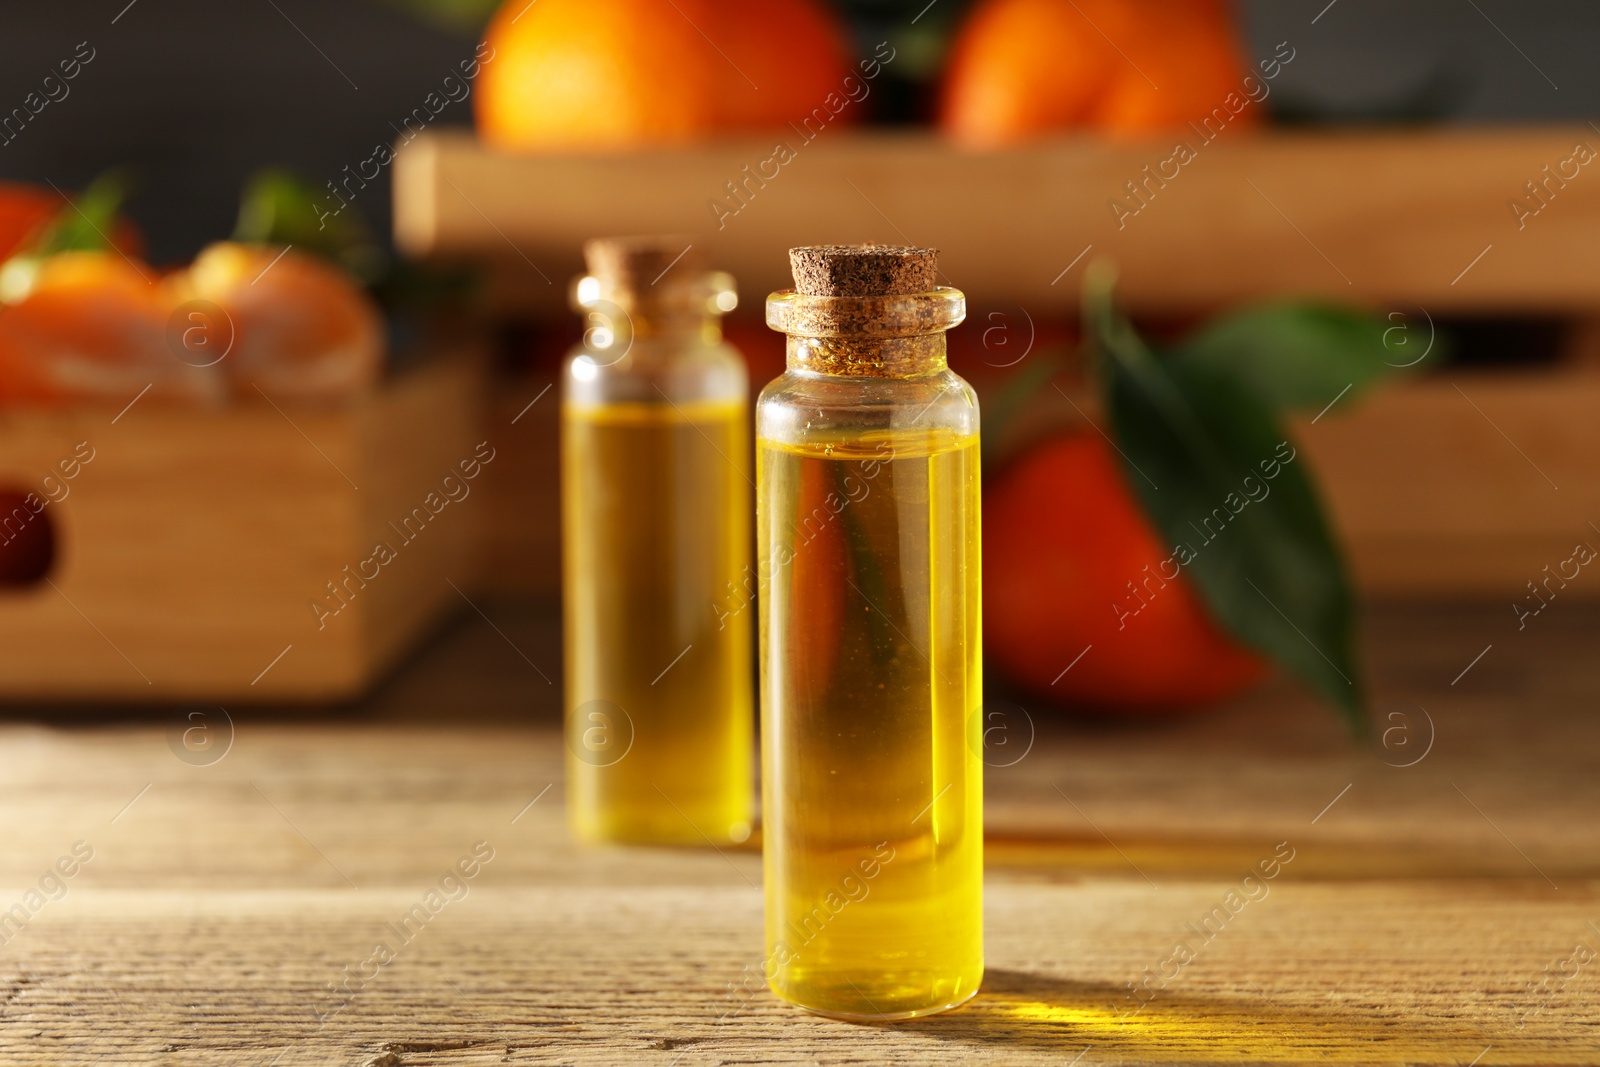 Photo of Bottles of tangerine essential oil on wooden table, closeup